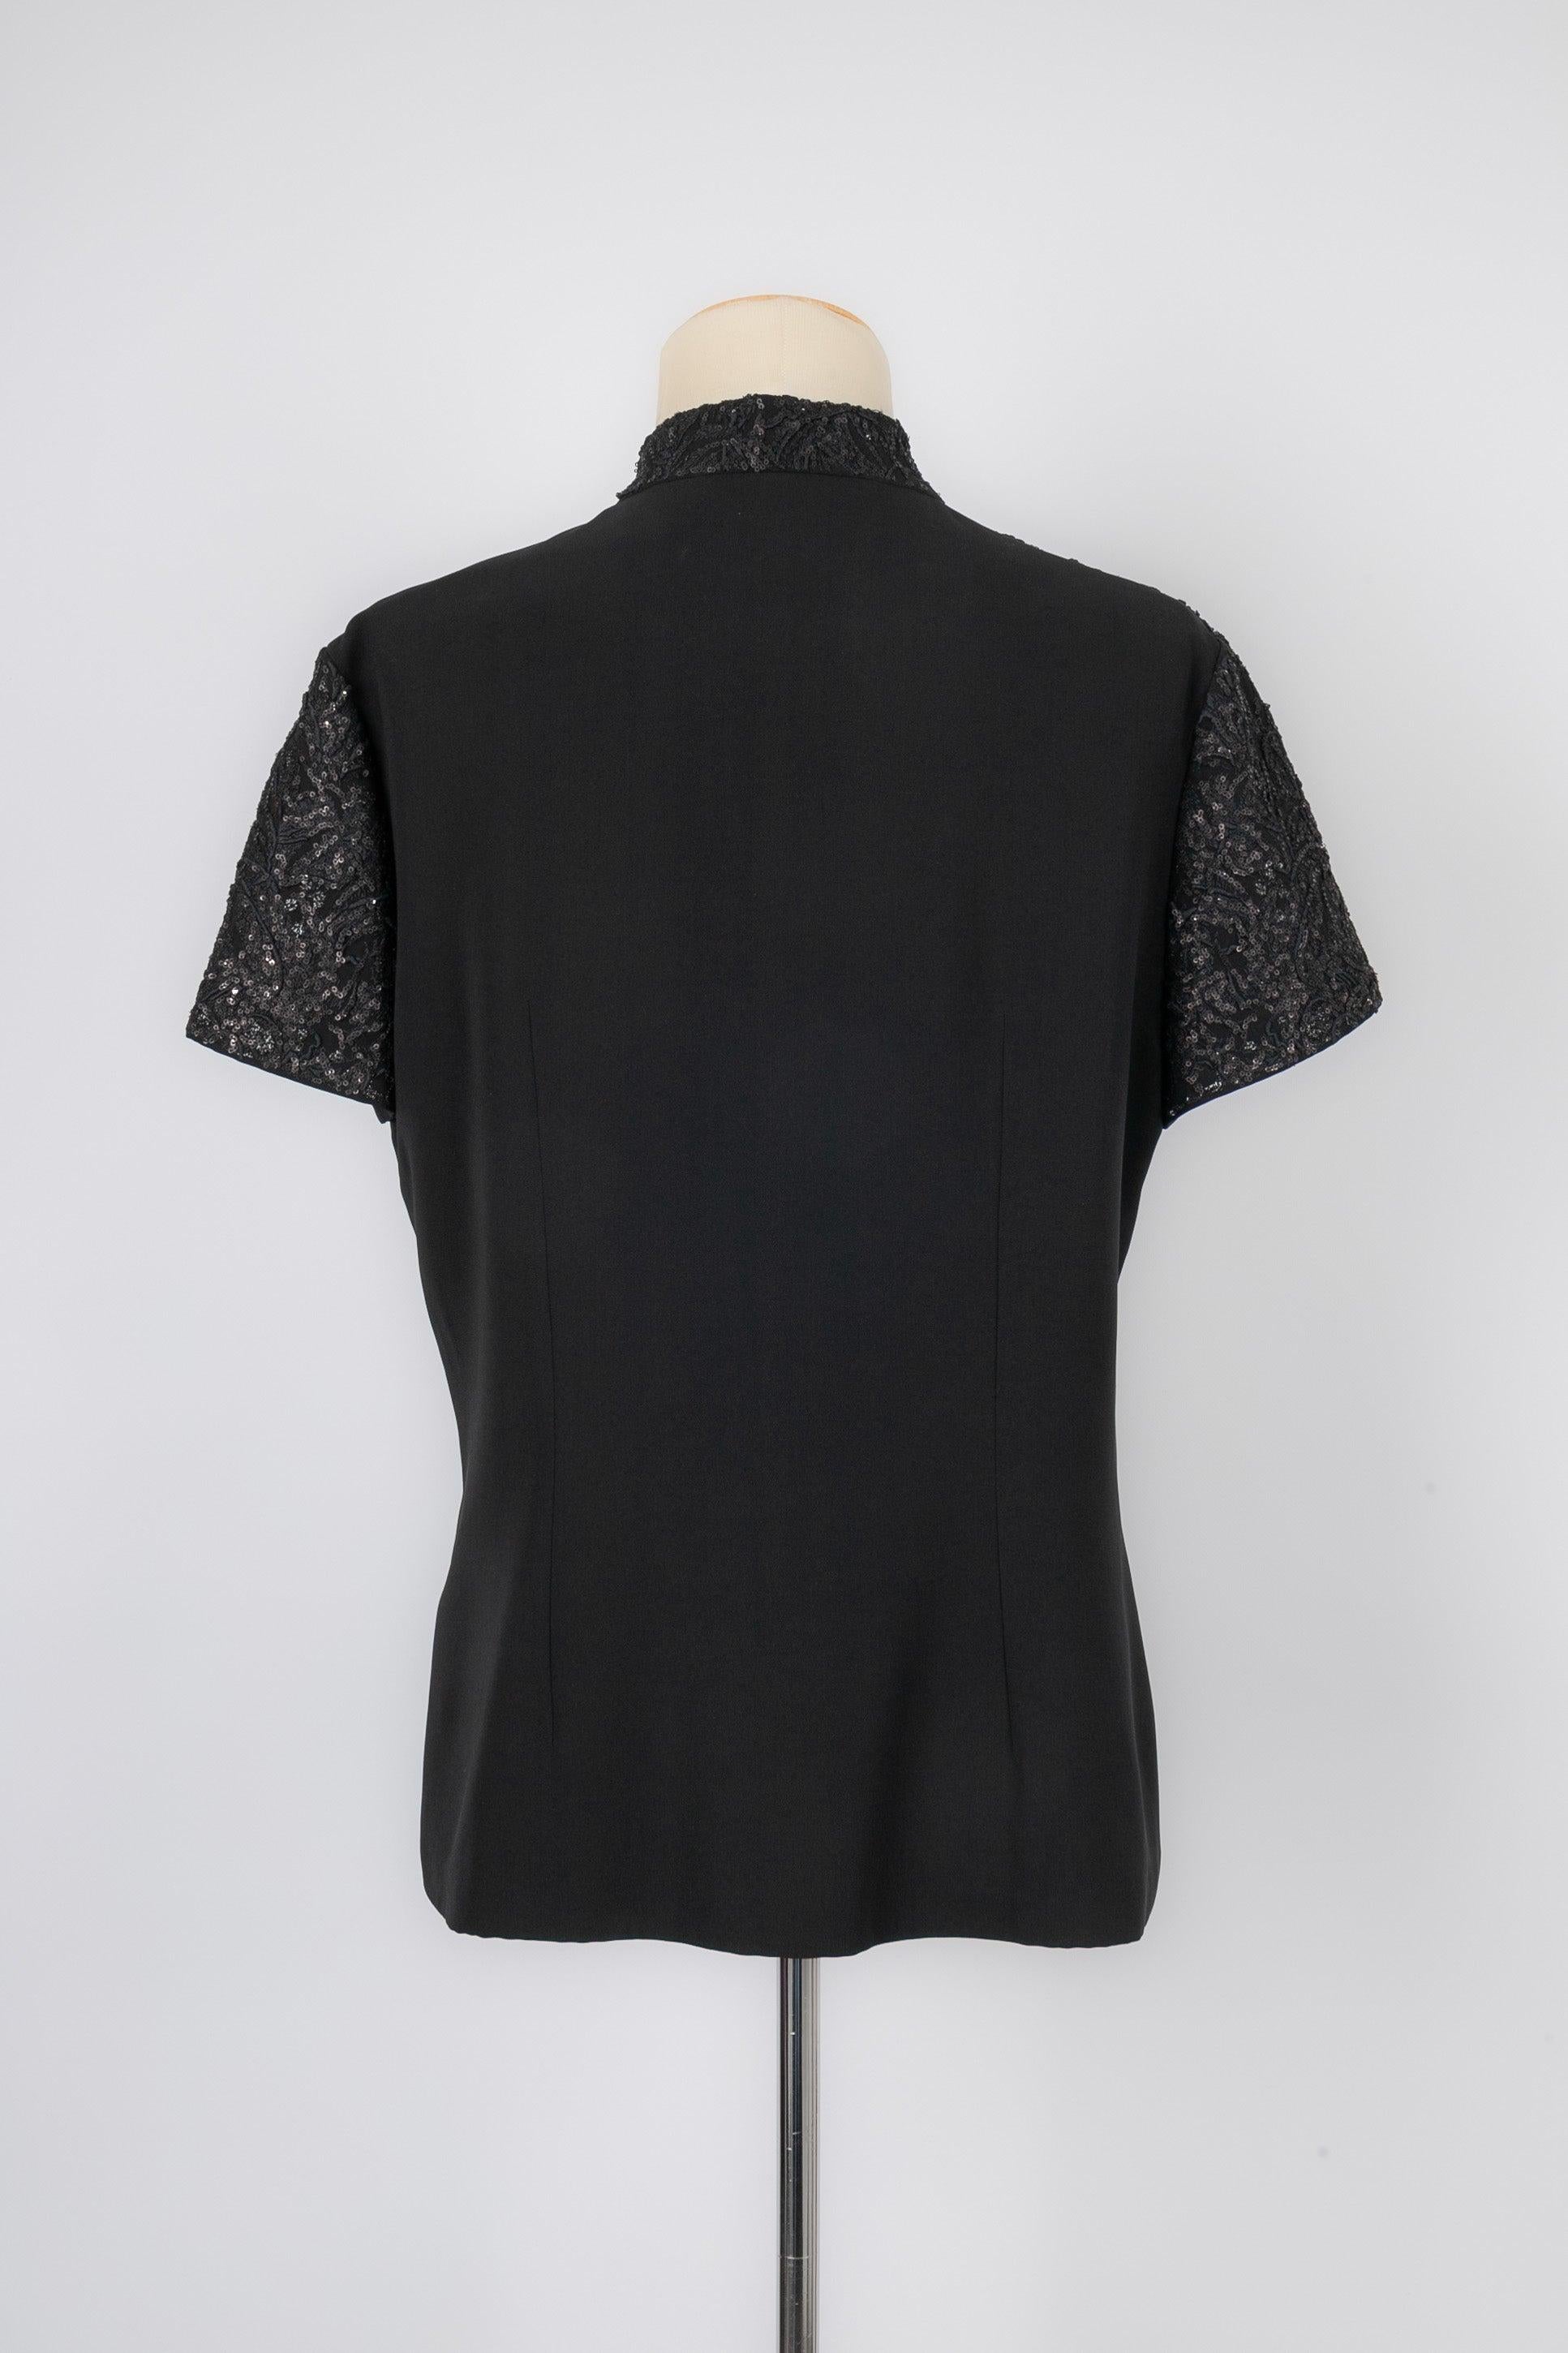 Christian Dior Embroidered Black Silk Top In Good Condition For Sale In SAINT-OUEN-SUR-SEINE, FR